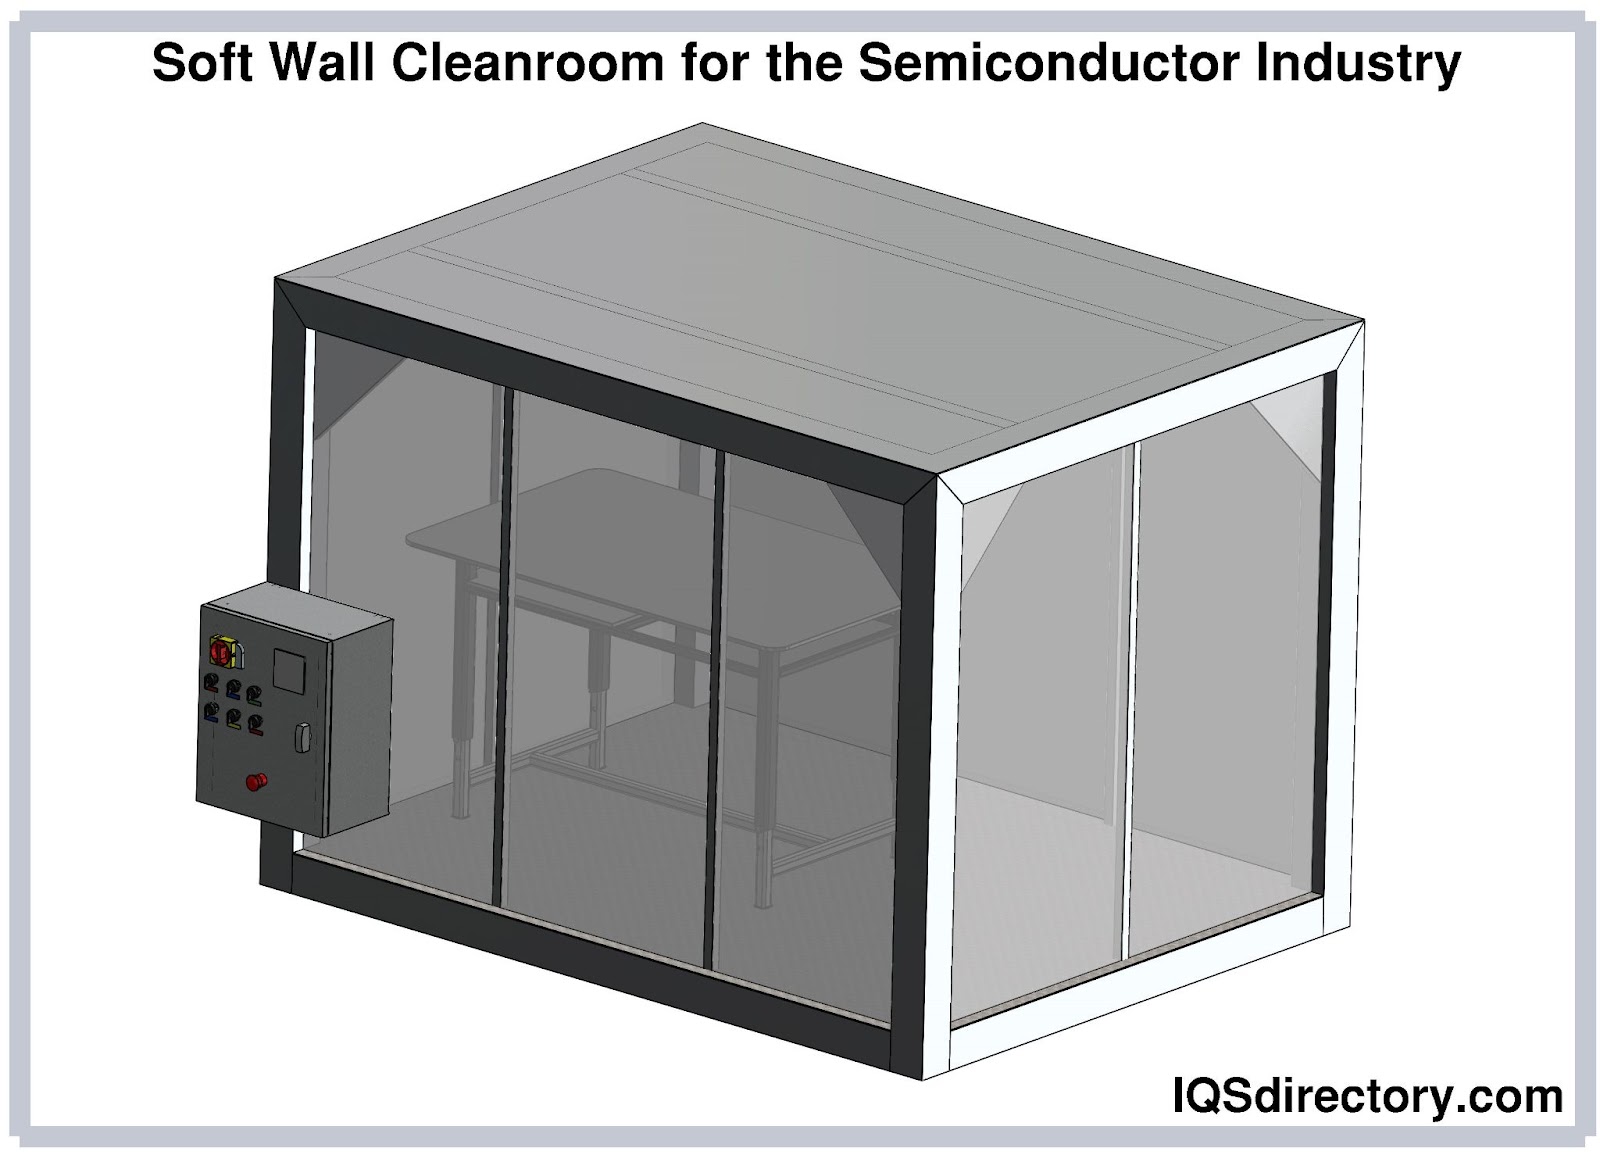 Soft Wall Cleanroom for the Semiconductor Industry